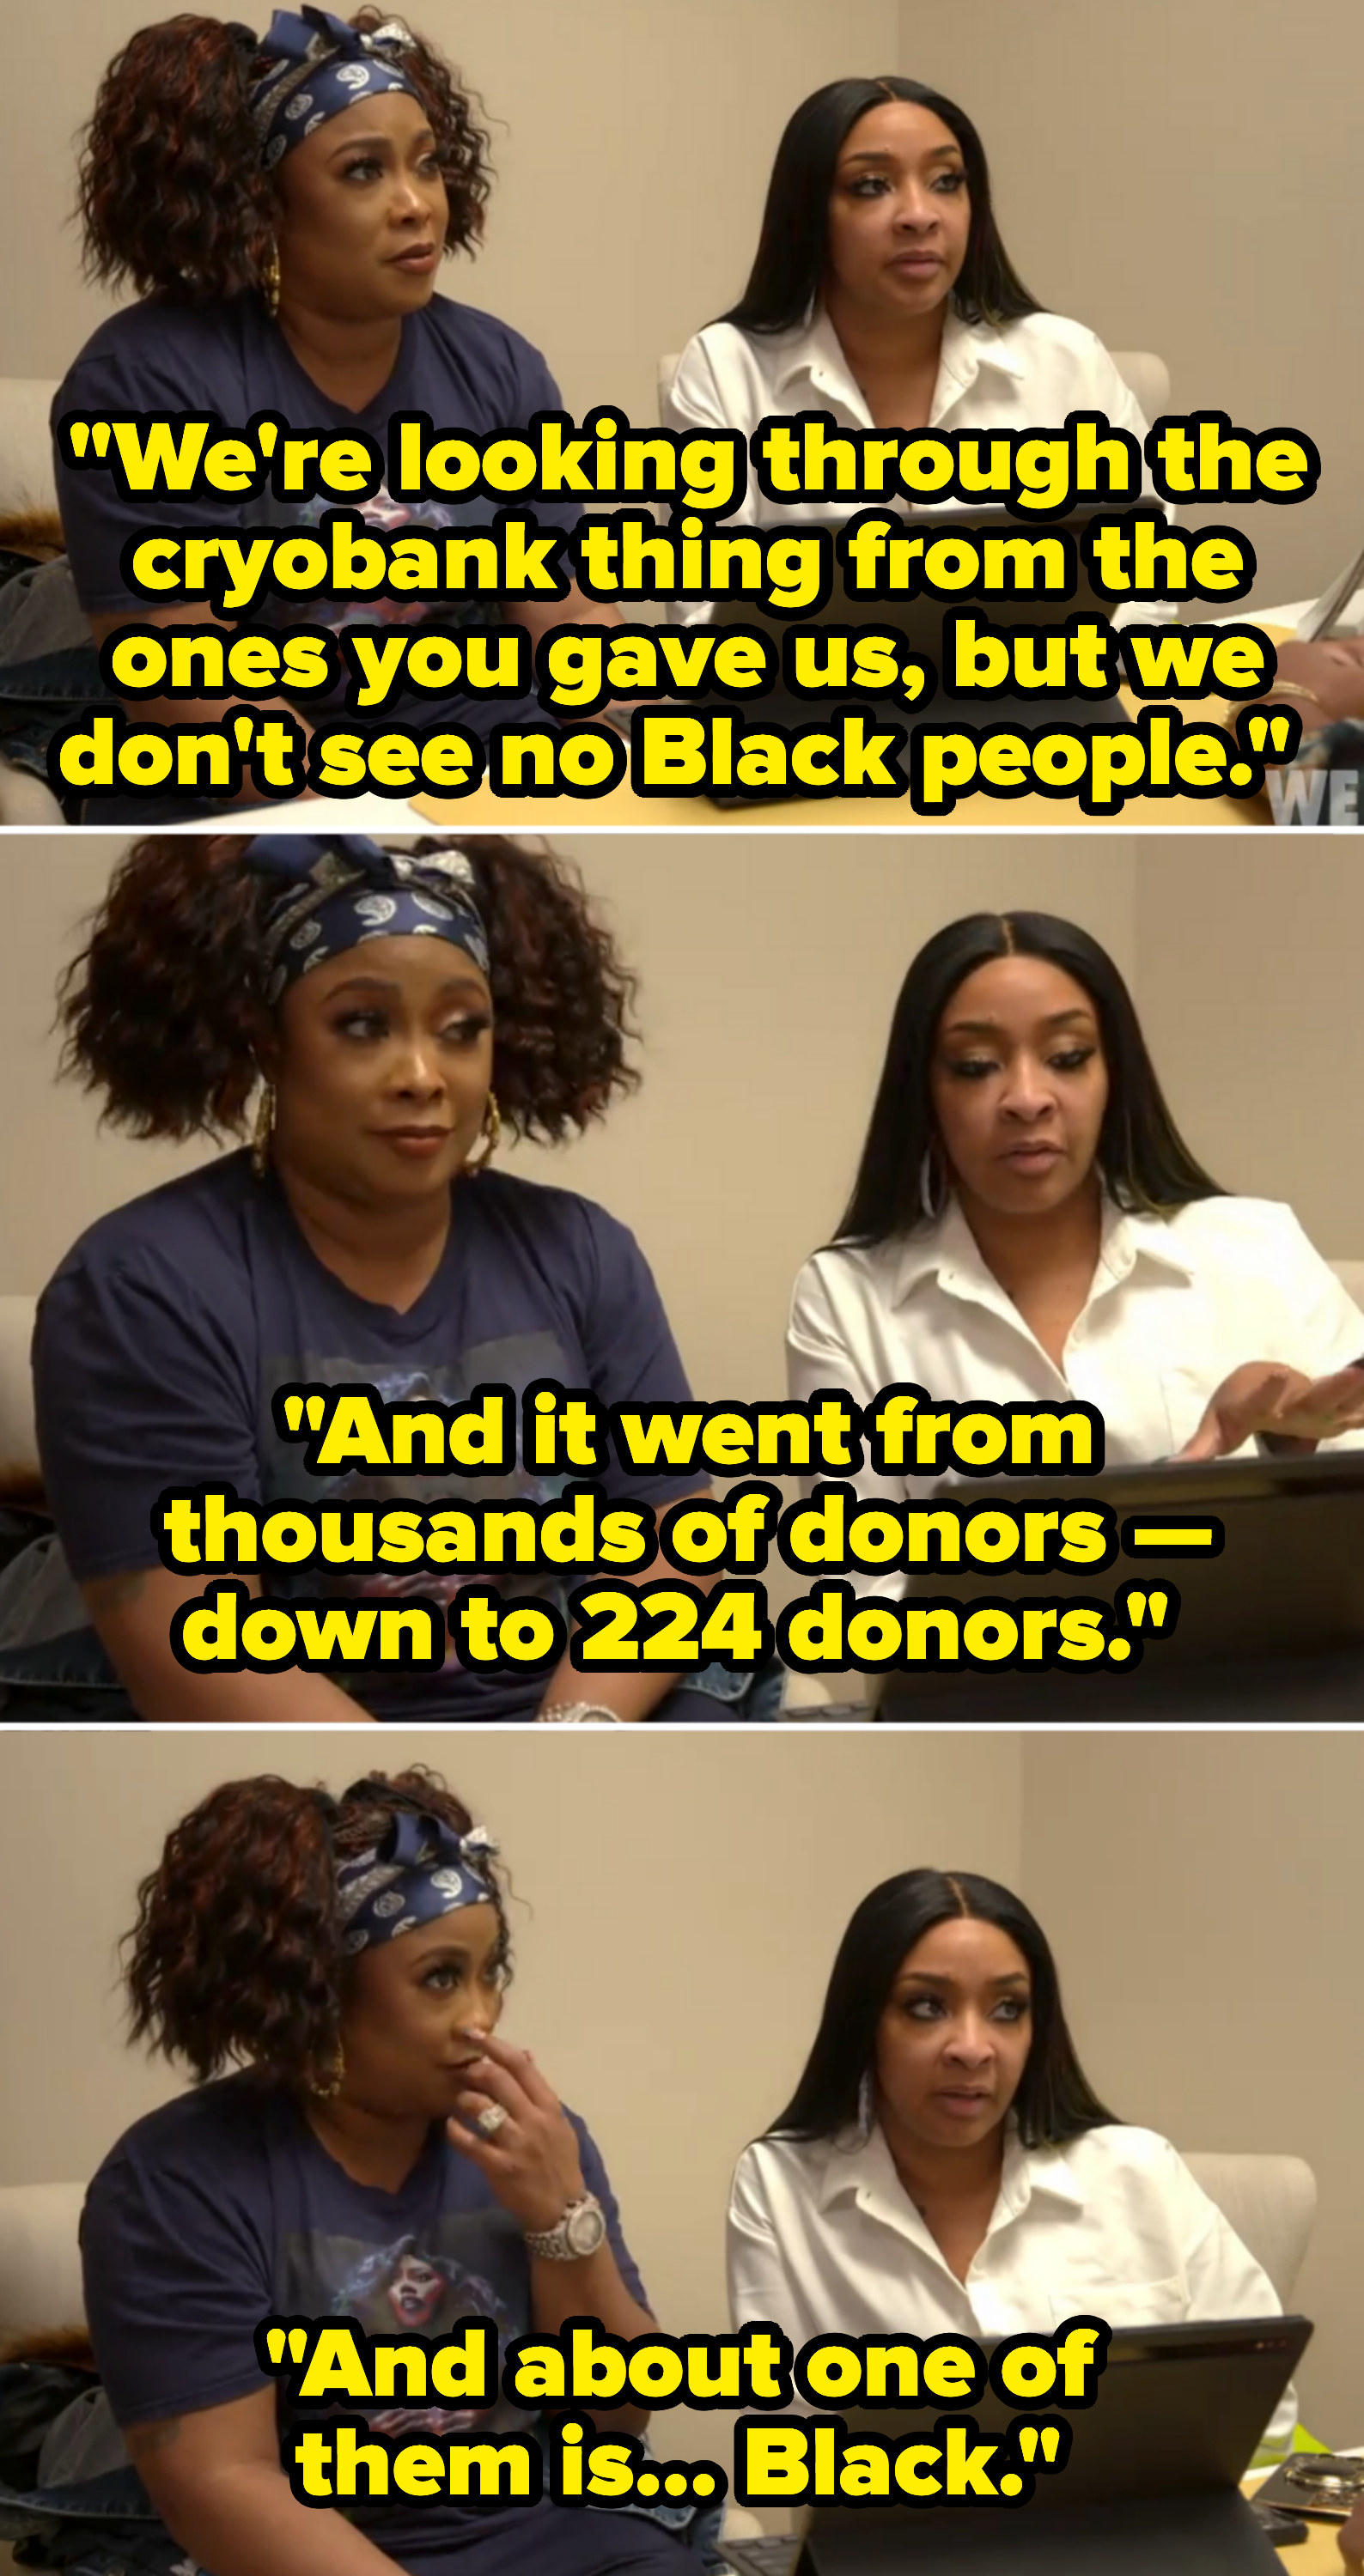 Da Brat and Judy say that out of thousands of donors and down to 224, about only one donor was Black